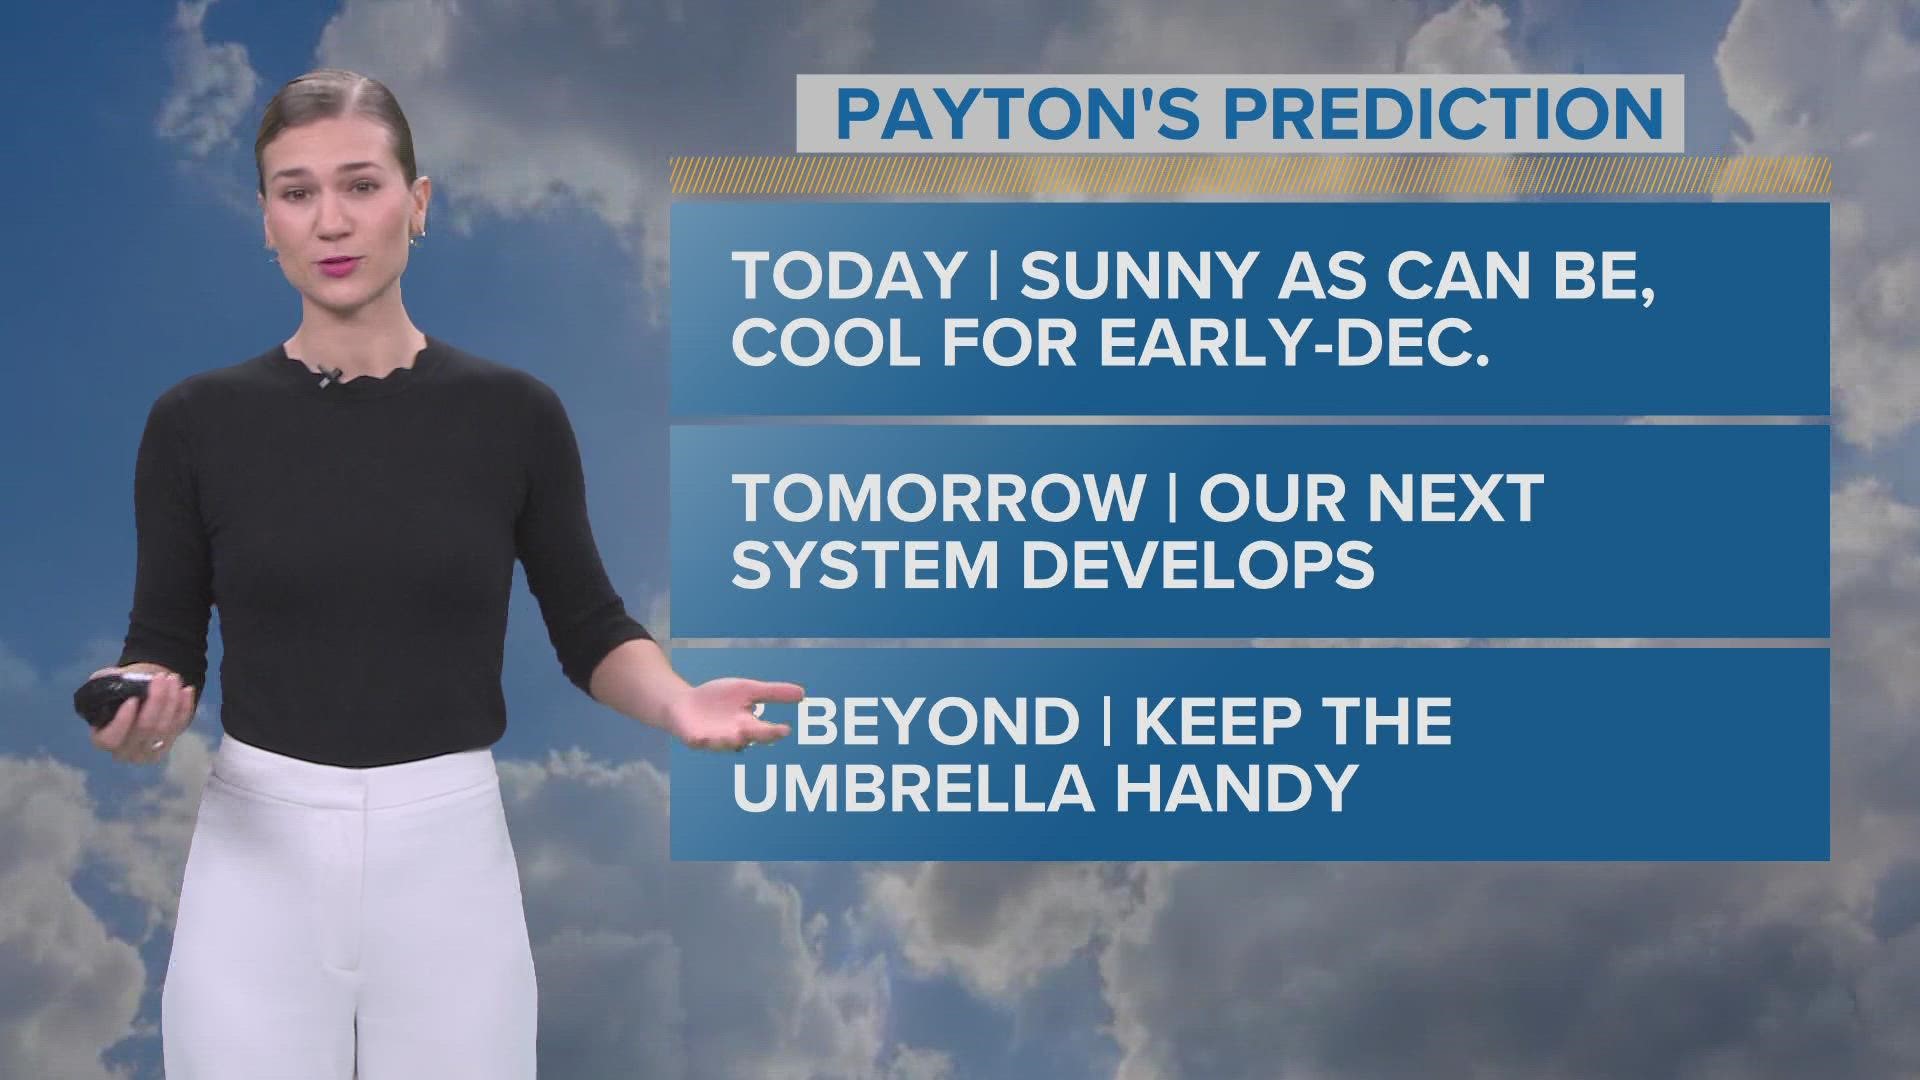 Payton says we will wake up to clear skies, but should see the temps stick around the 30s today.